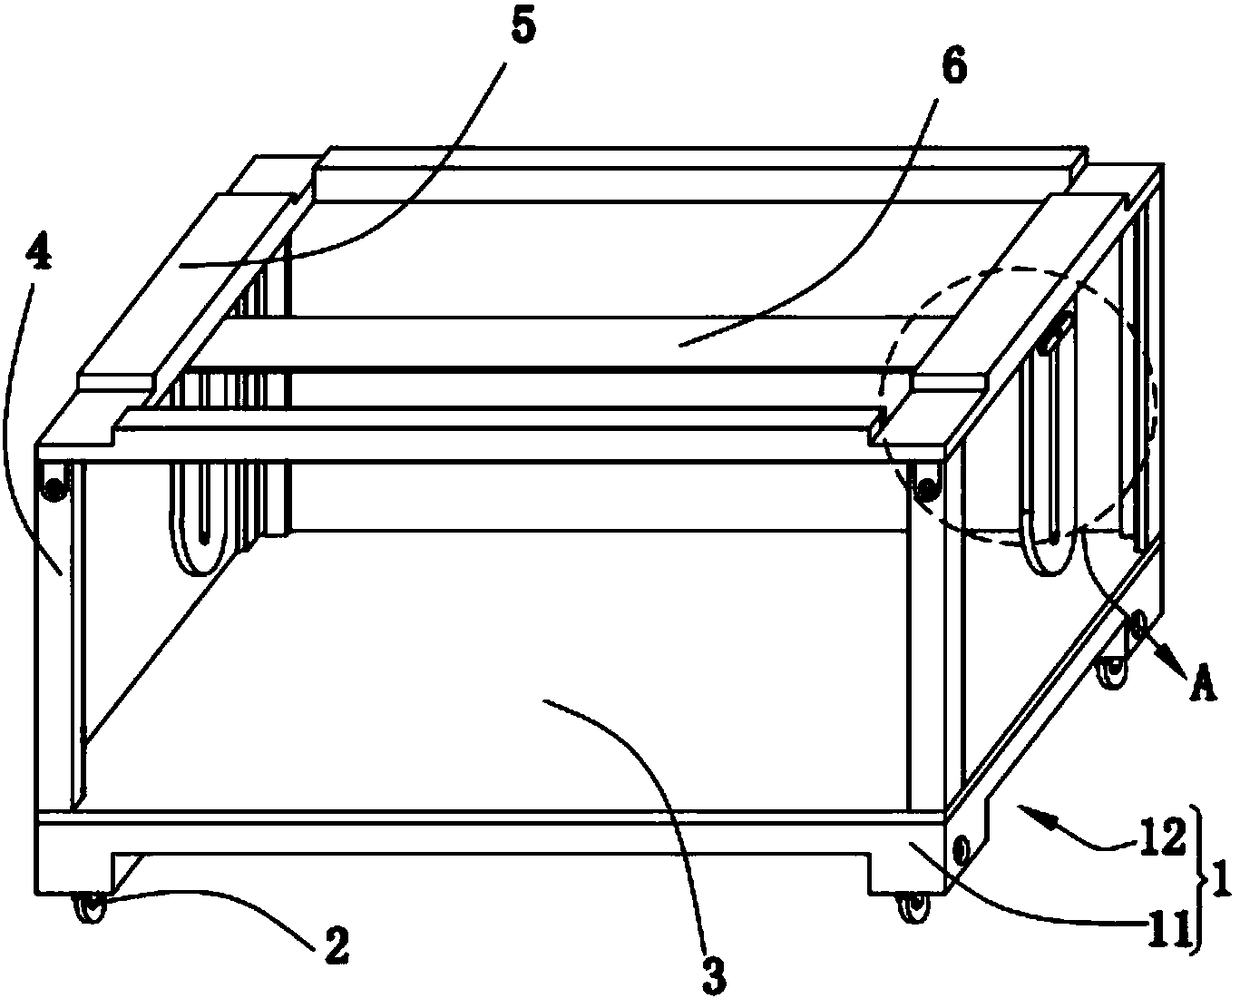 Production device for colored optical glass